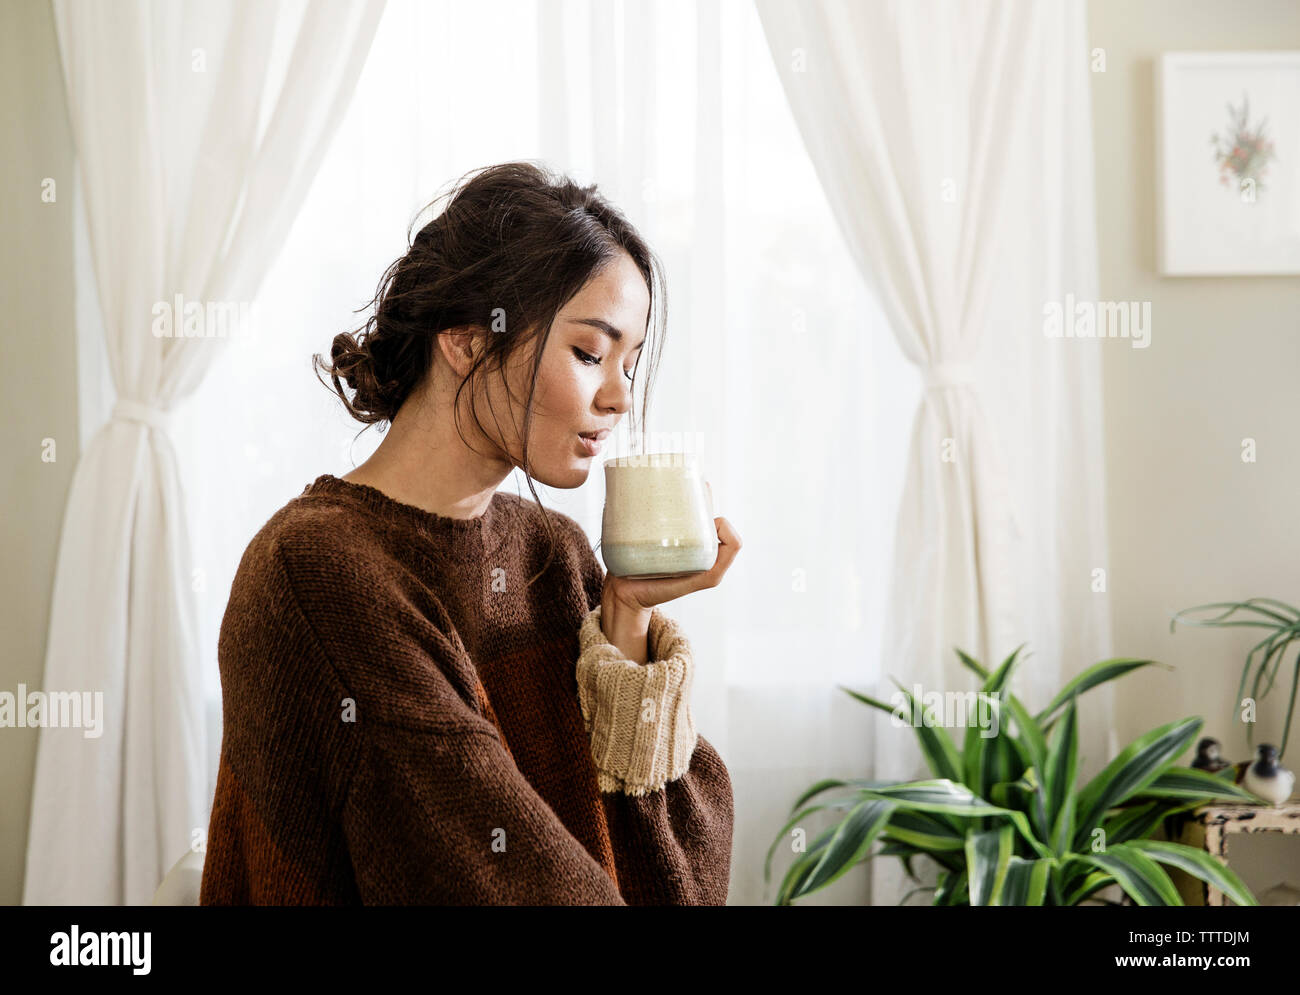 Young woman drinking coffee at home Stock Photo